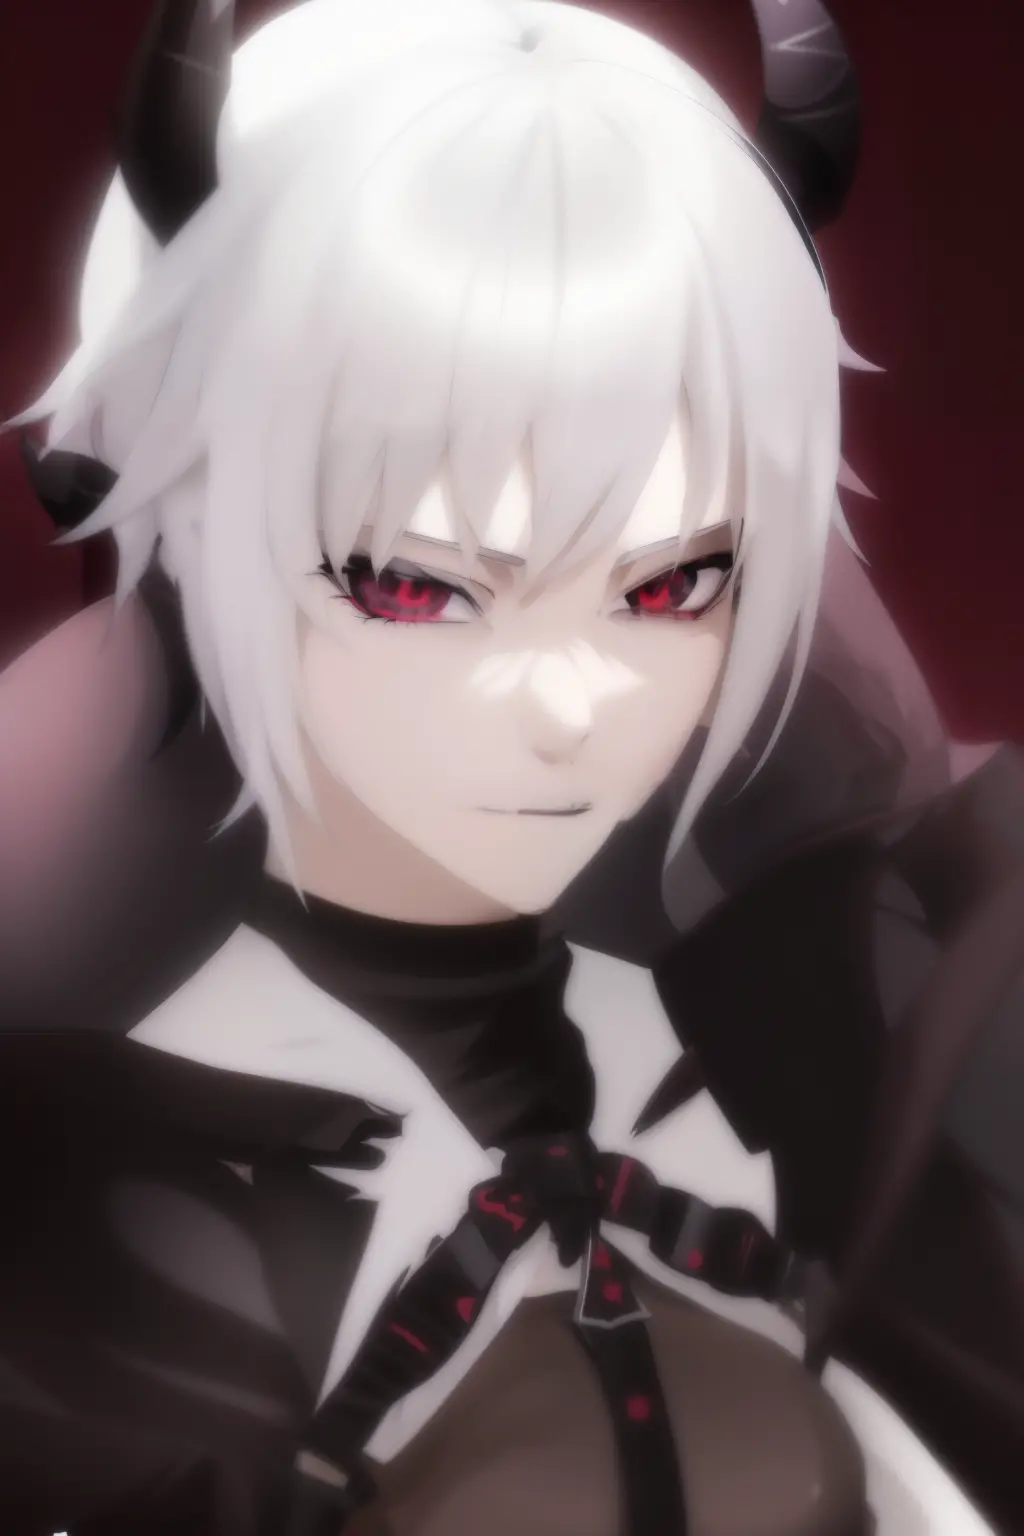 anime girl with white hair and black outfit with horns, with black horns instead of ears, fit male demon with white horns, 2b, 2 b, gapmoe yandere grimdark, he has dark grey hairs, lineless, devious evil expression, neferpitou, evil devious male, imvu, dem...